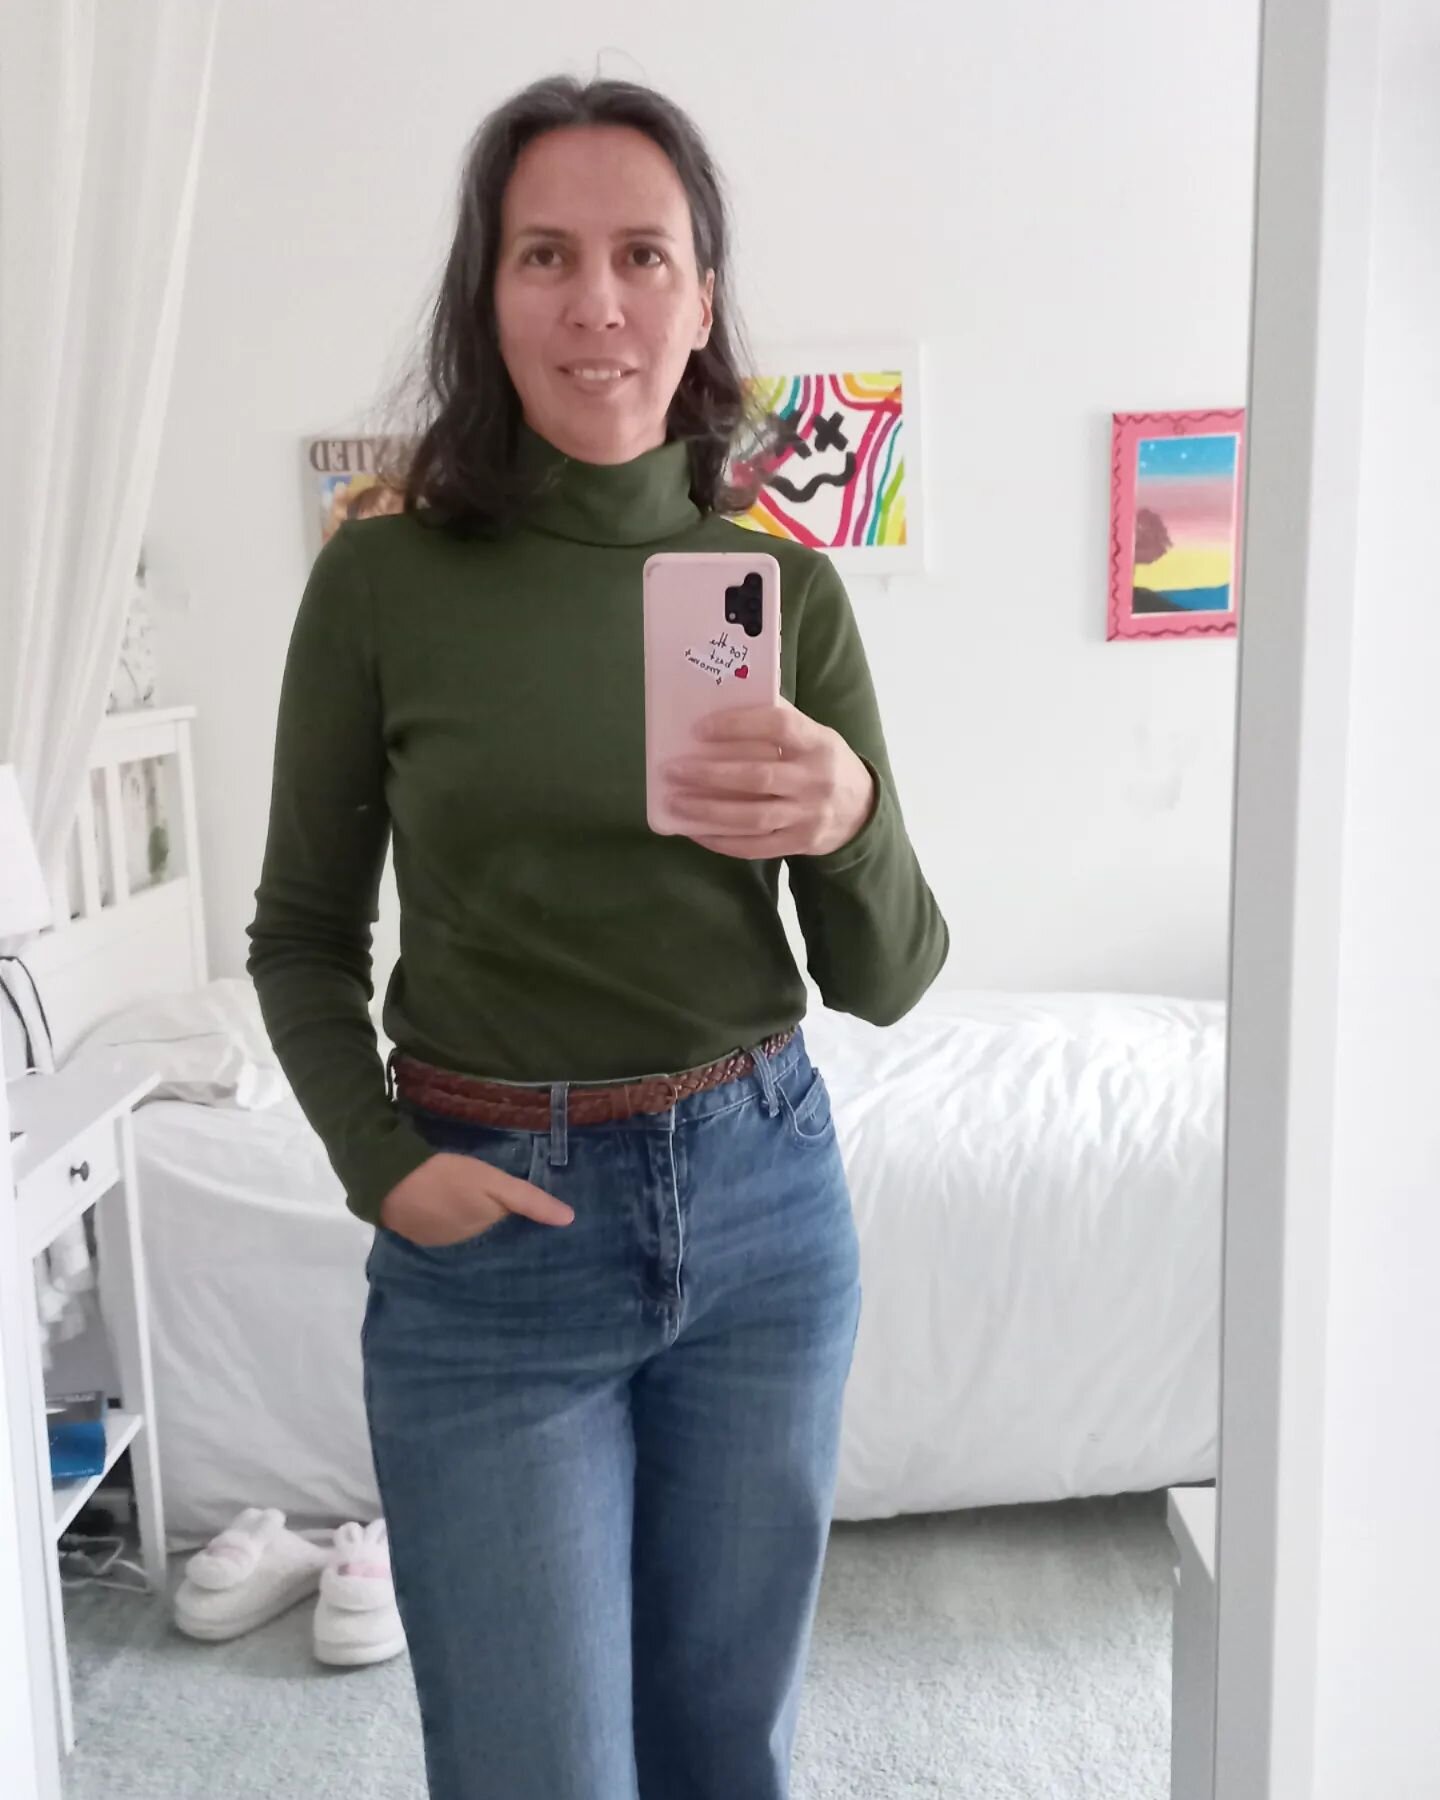 I made a Trudy turtleneck by @wardrobebymepatterns and loved it so much that I made two more already. This one is made in rib knit from @ilovekutchi.
.
.
#myhandmadewardrobe
#memade #memadeeveryday #sewing #sewist #handmadeclothes